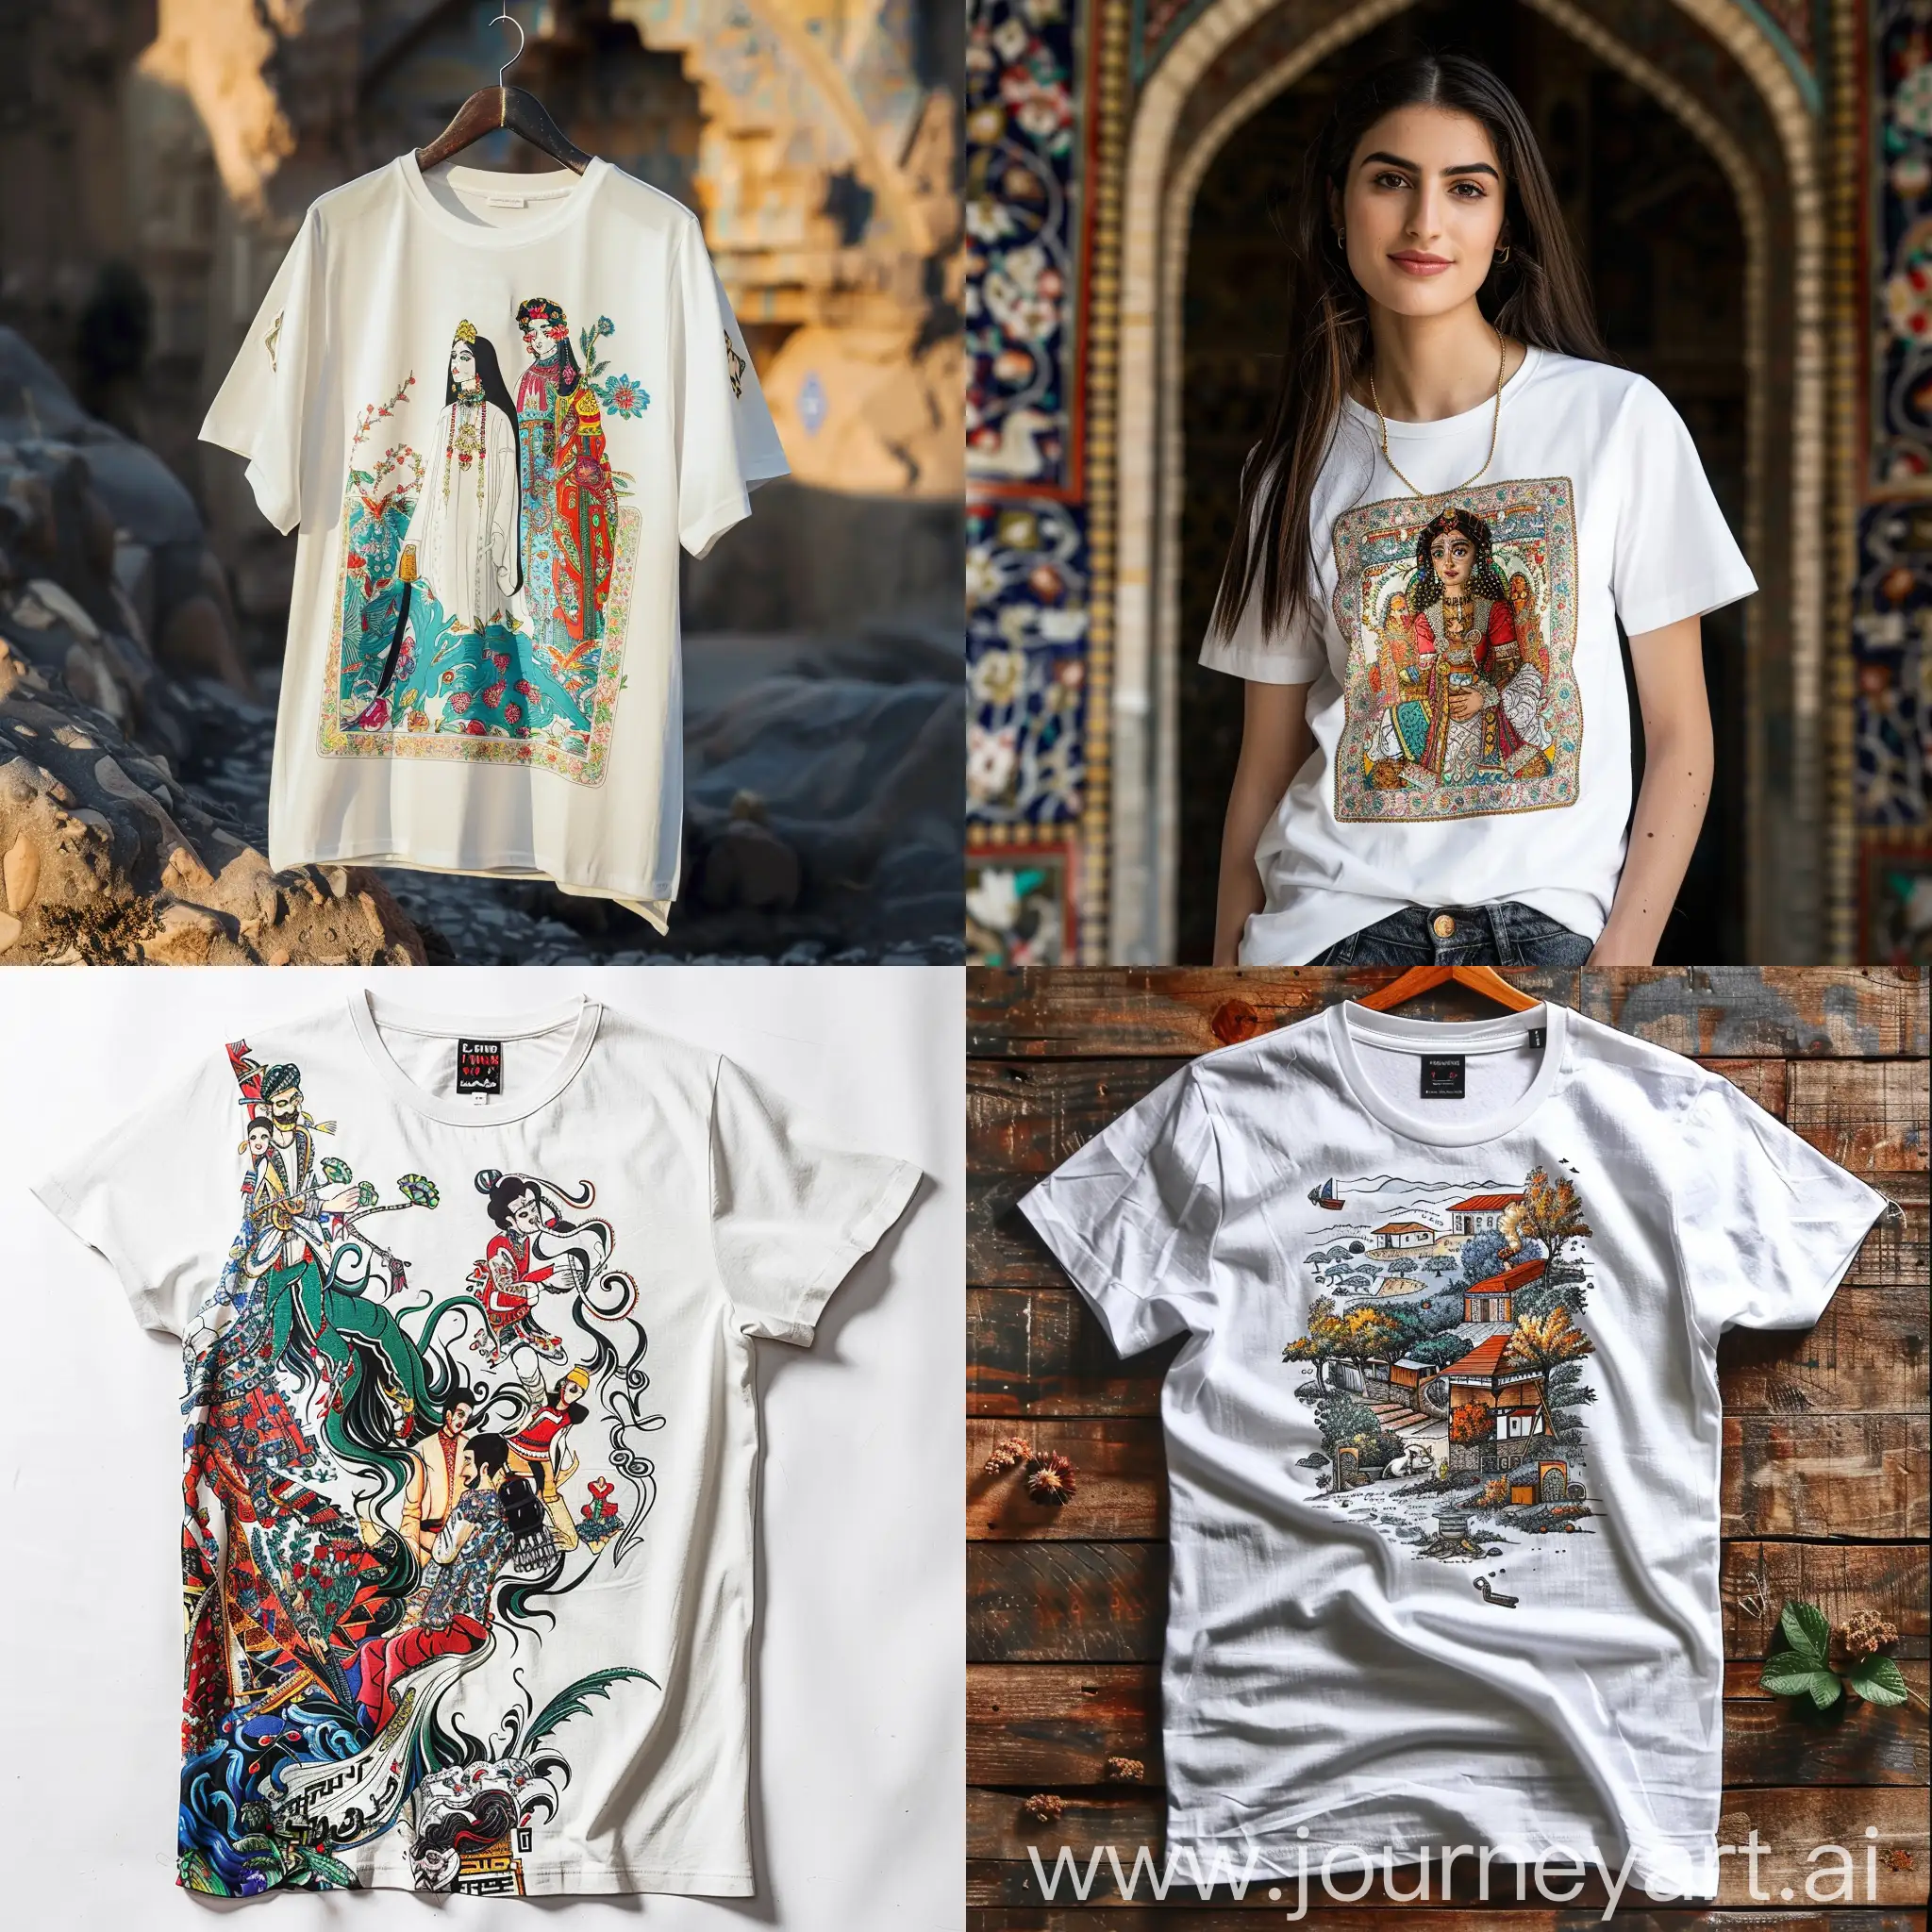 Design a t-shirt that is white and has original designs of Iranian culture.